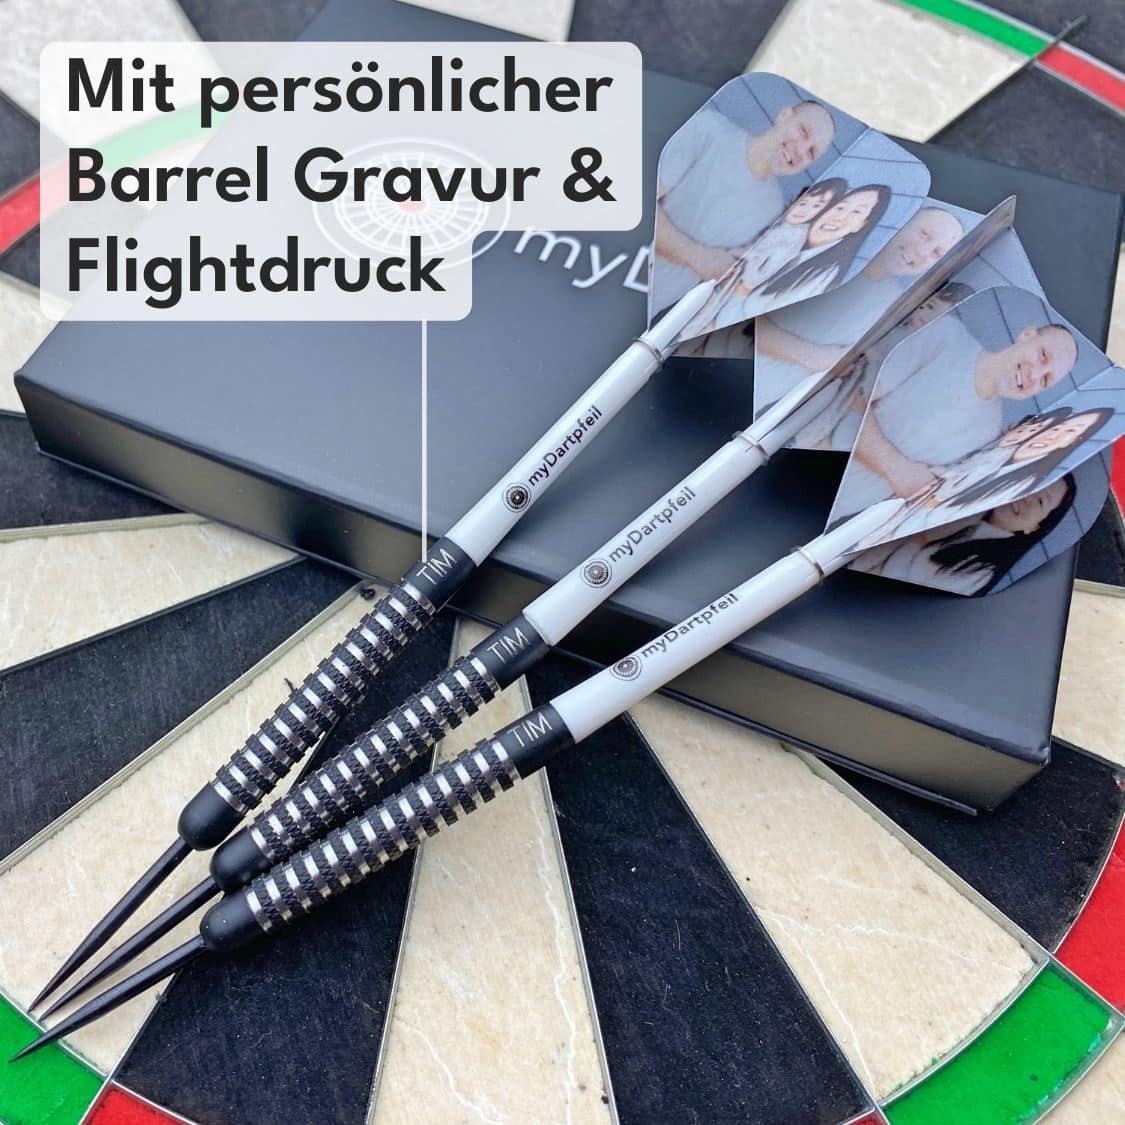 Personalized darts to design yourself (3 pcs.)